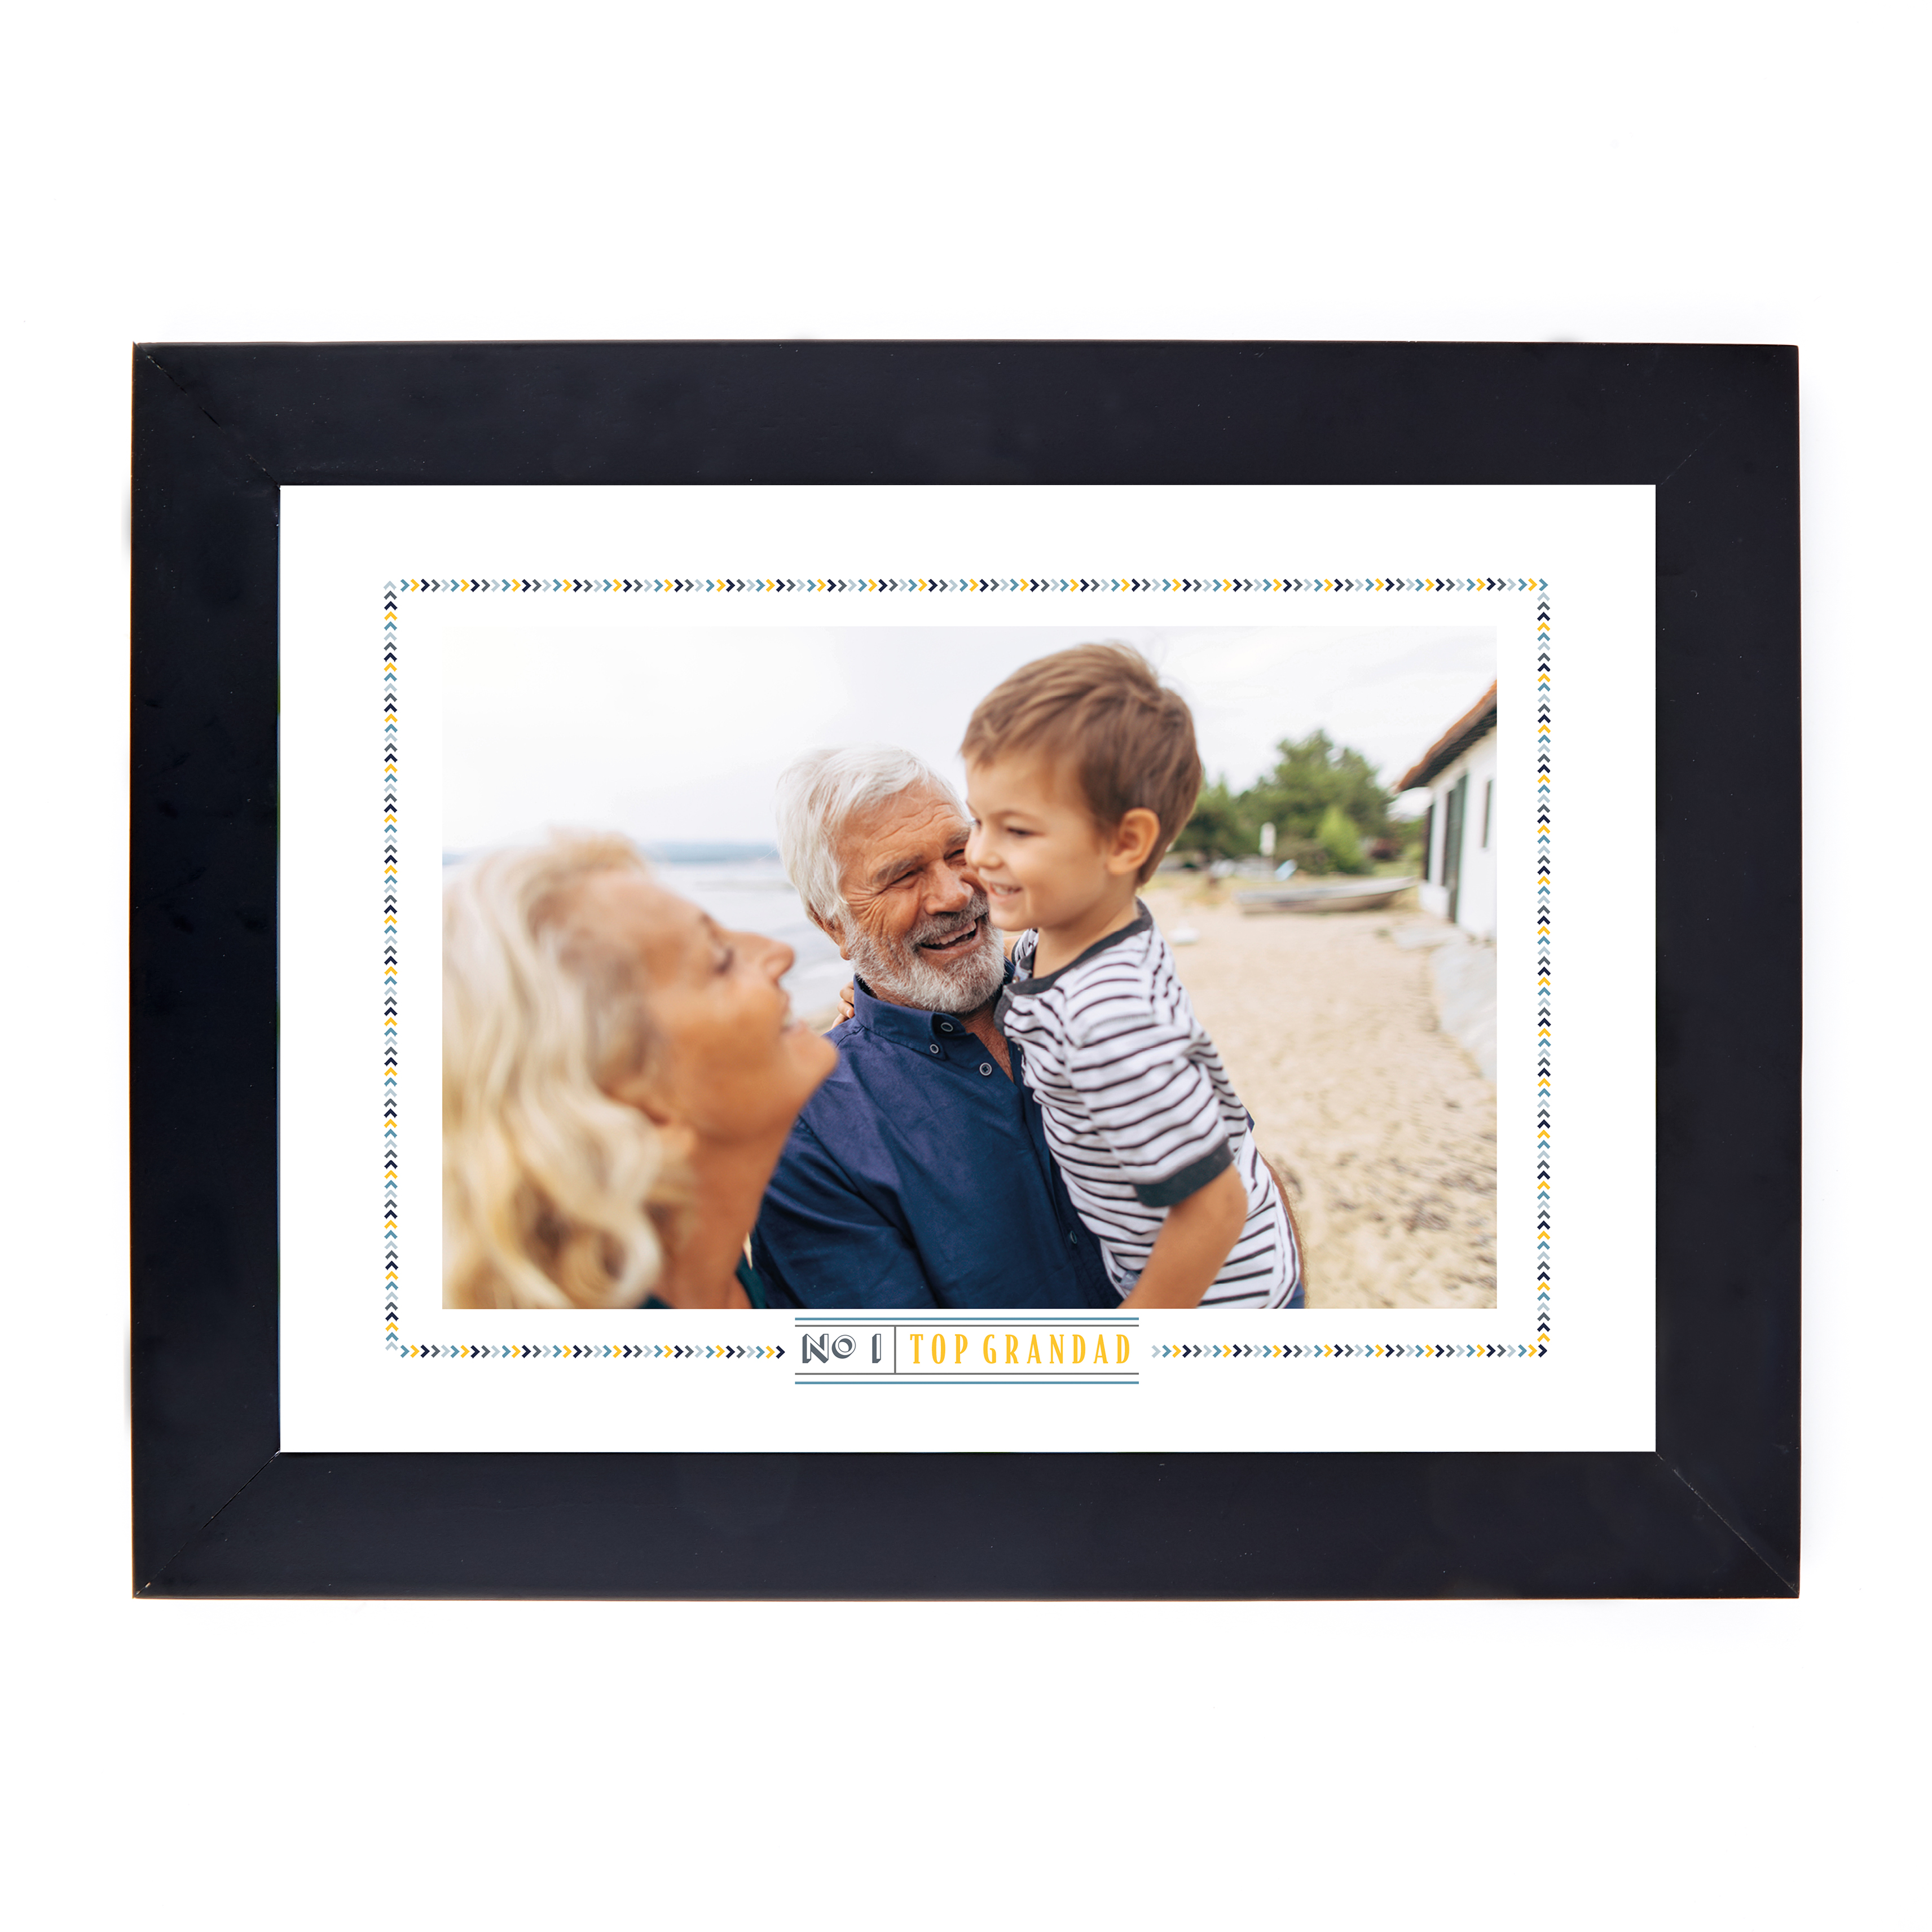 Personalised Father's Day Photo Print - No 1, Top Grandad